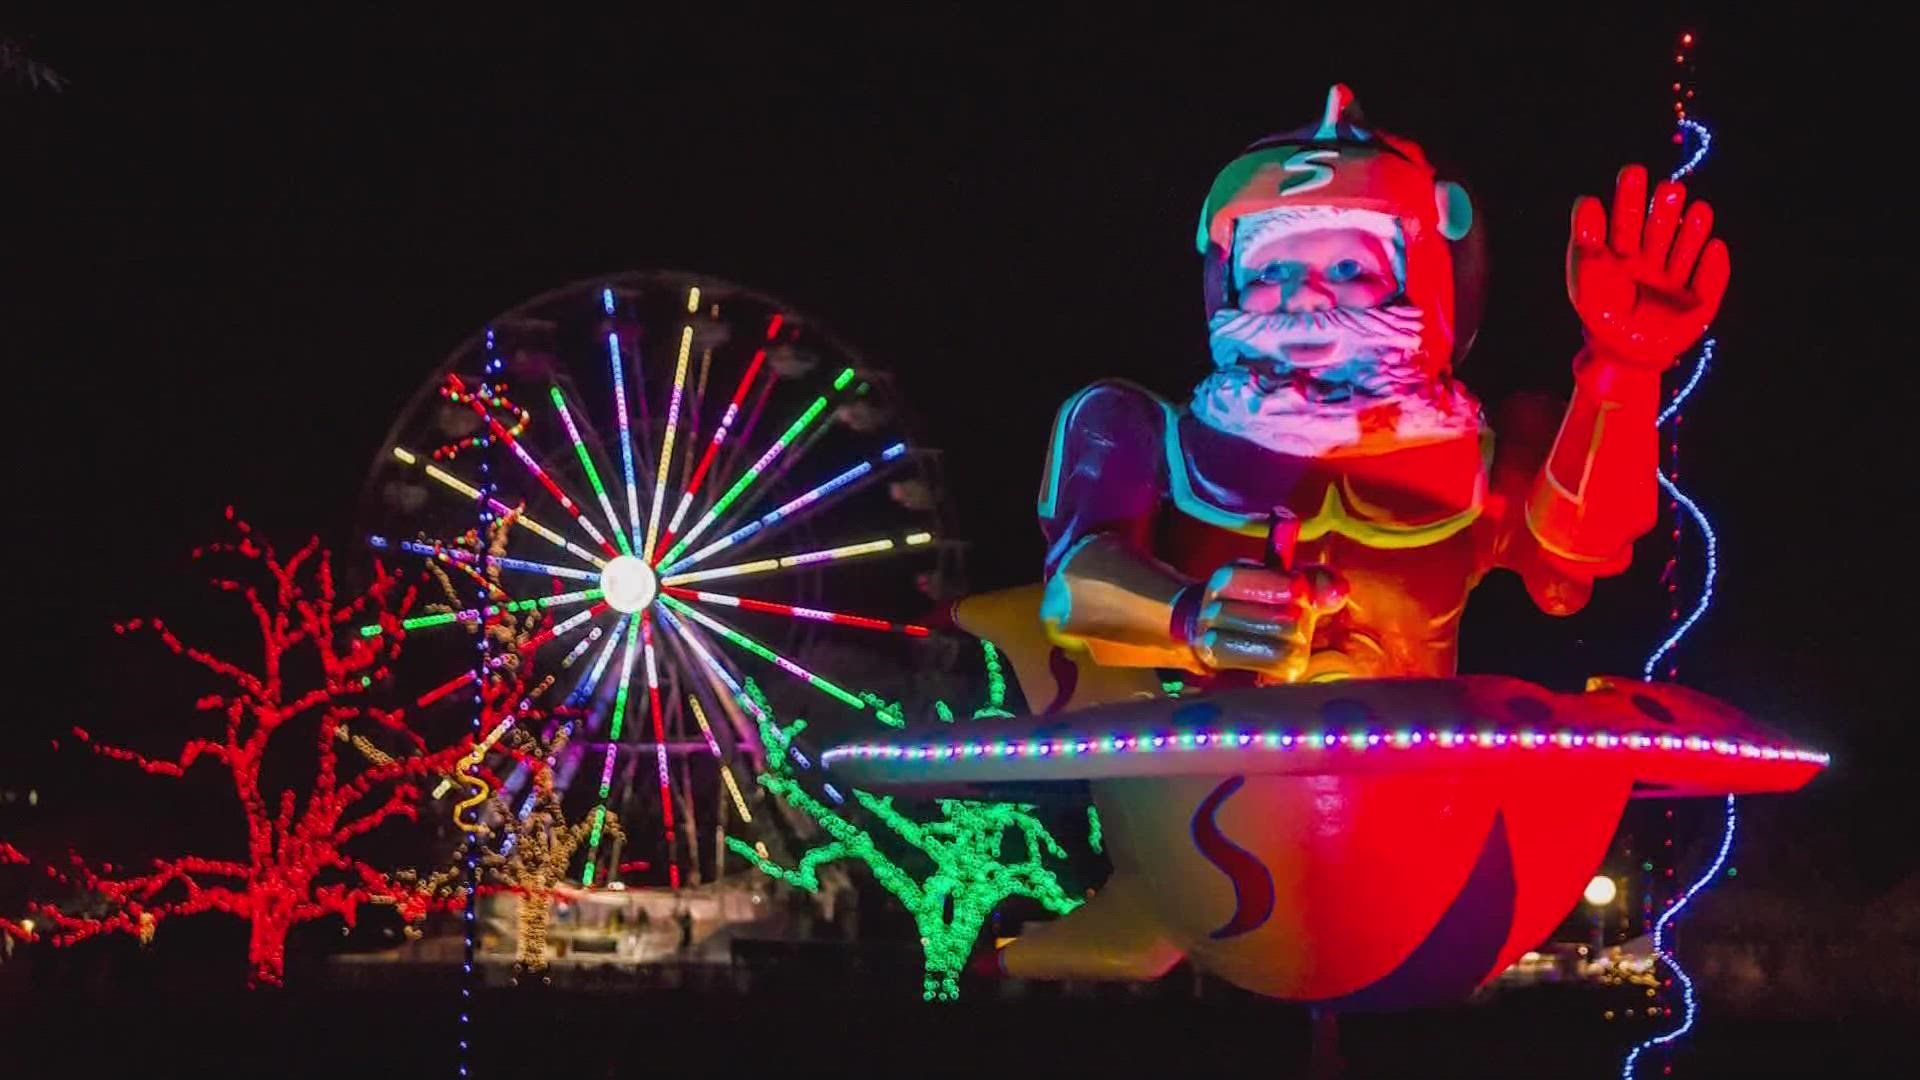 This winter, the 58th annual Austin Trail of Lights is set to return to its traditional format after two years of pandemic-related adjustments.